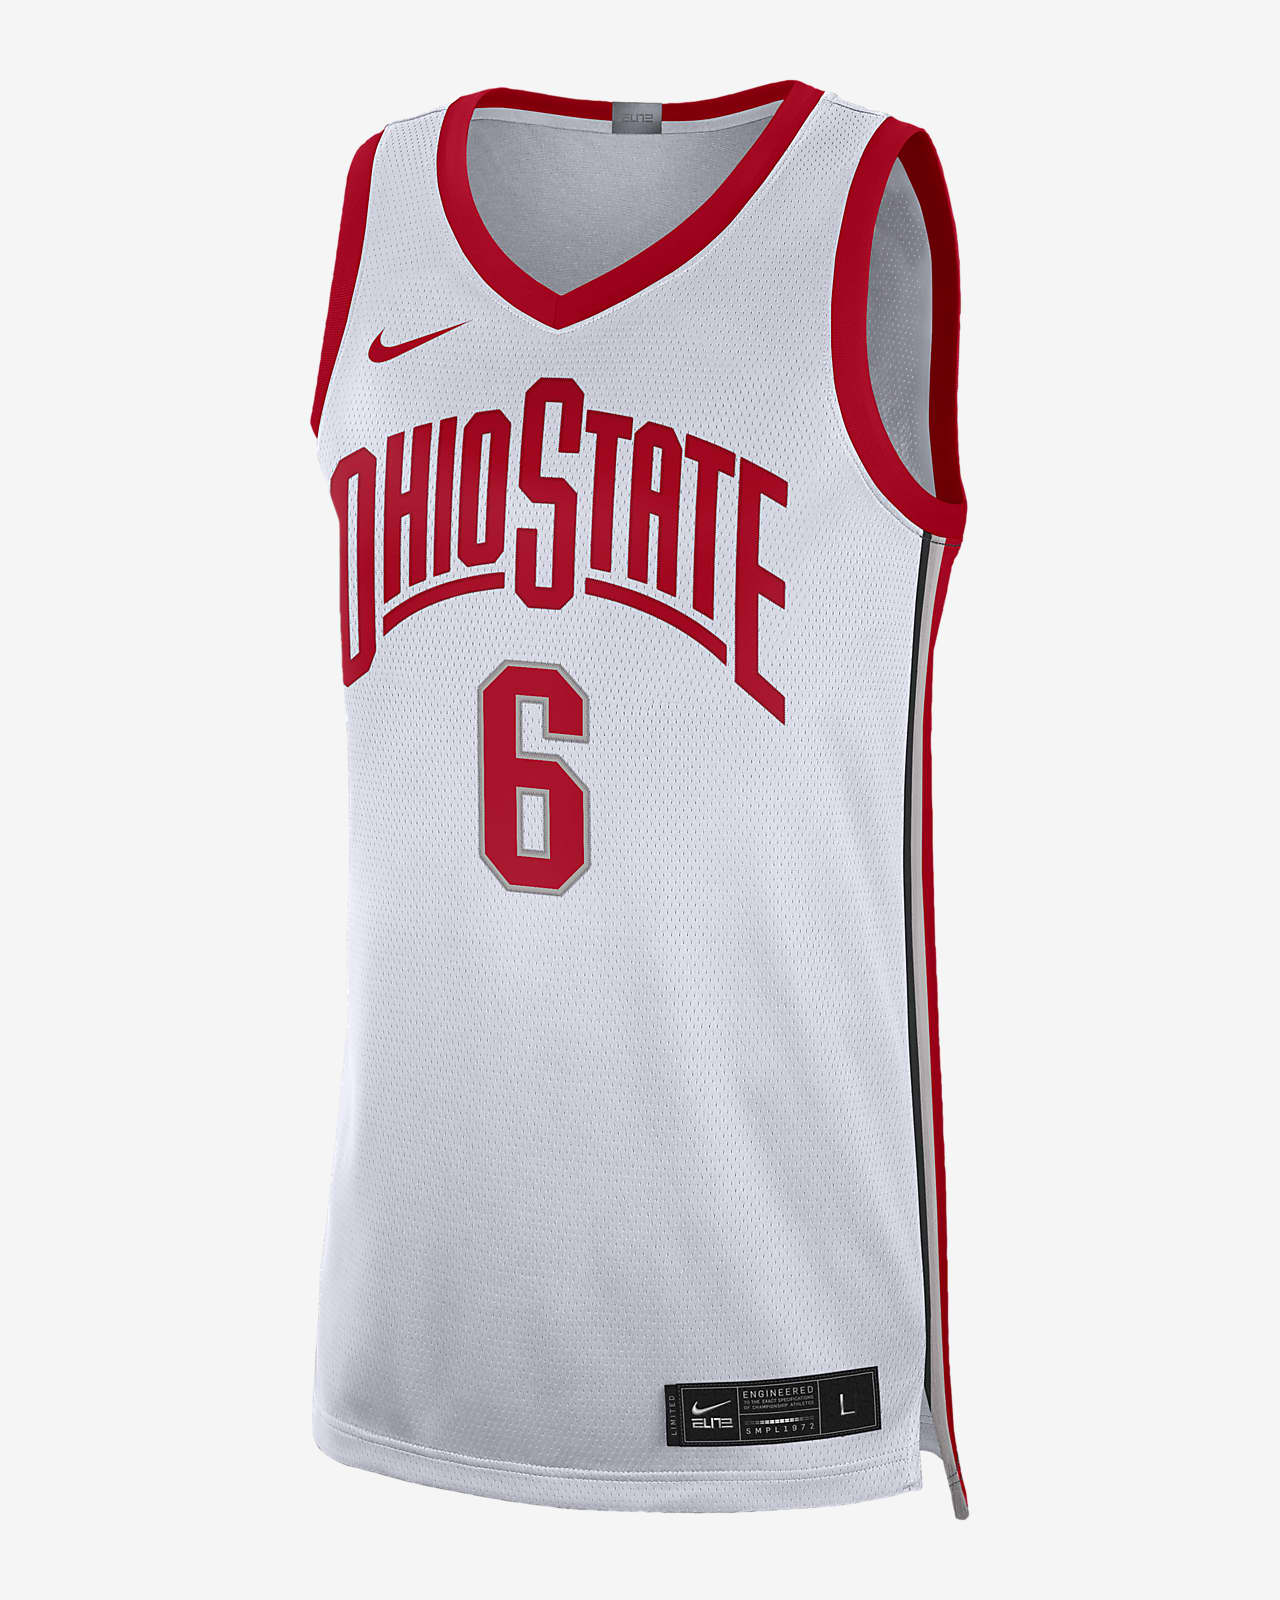 Ohio State Limited Men's Nike College Dri-FIT Basketball Jersey